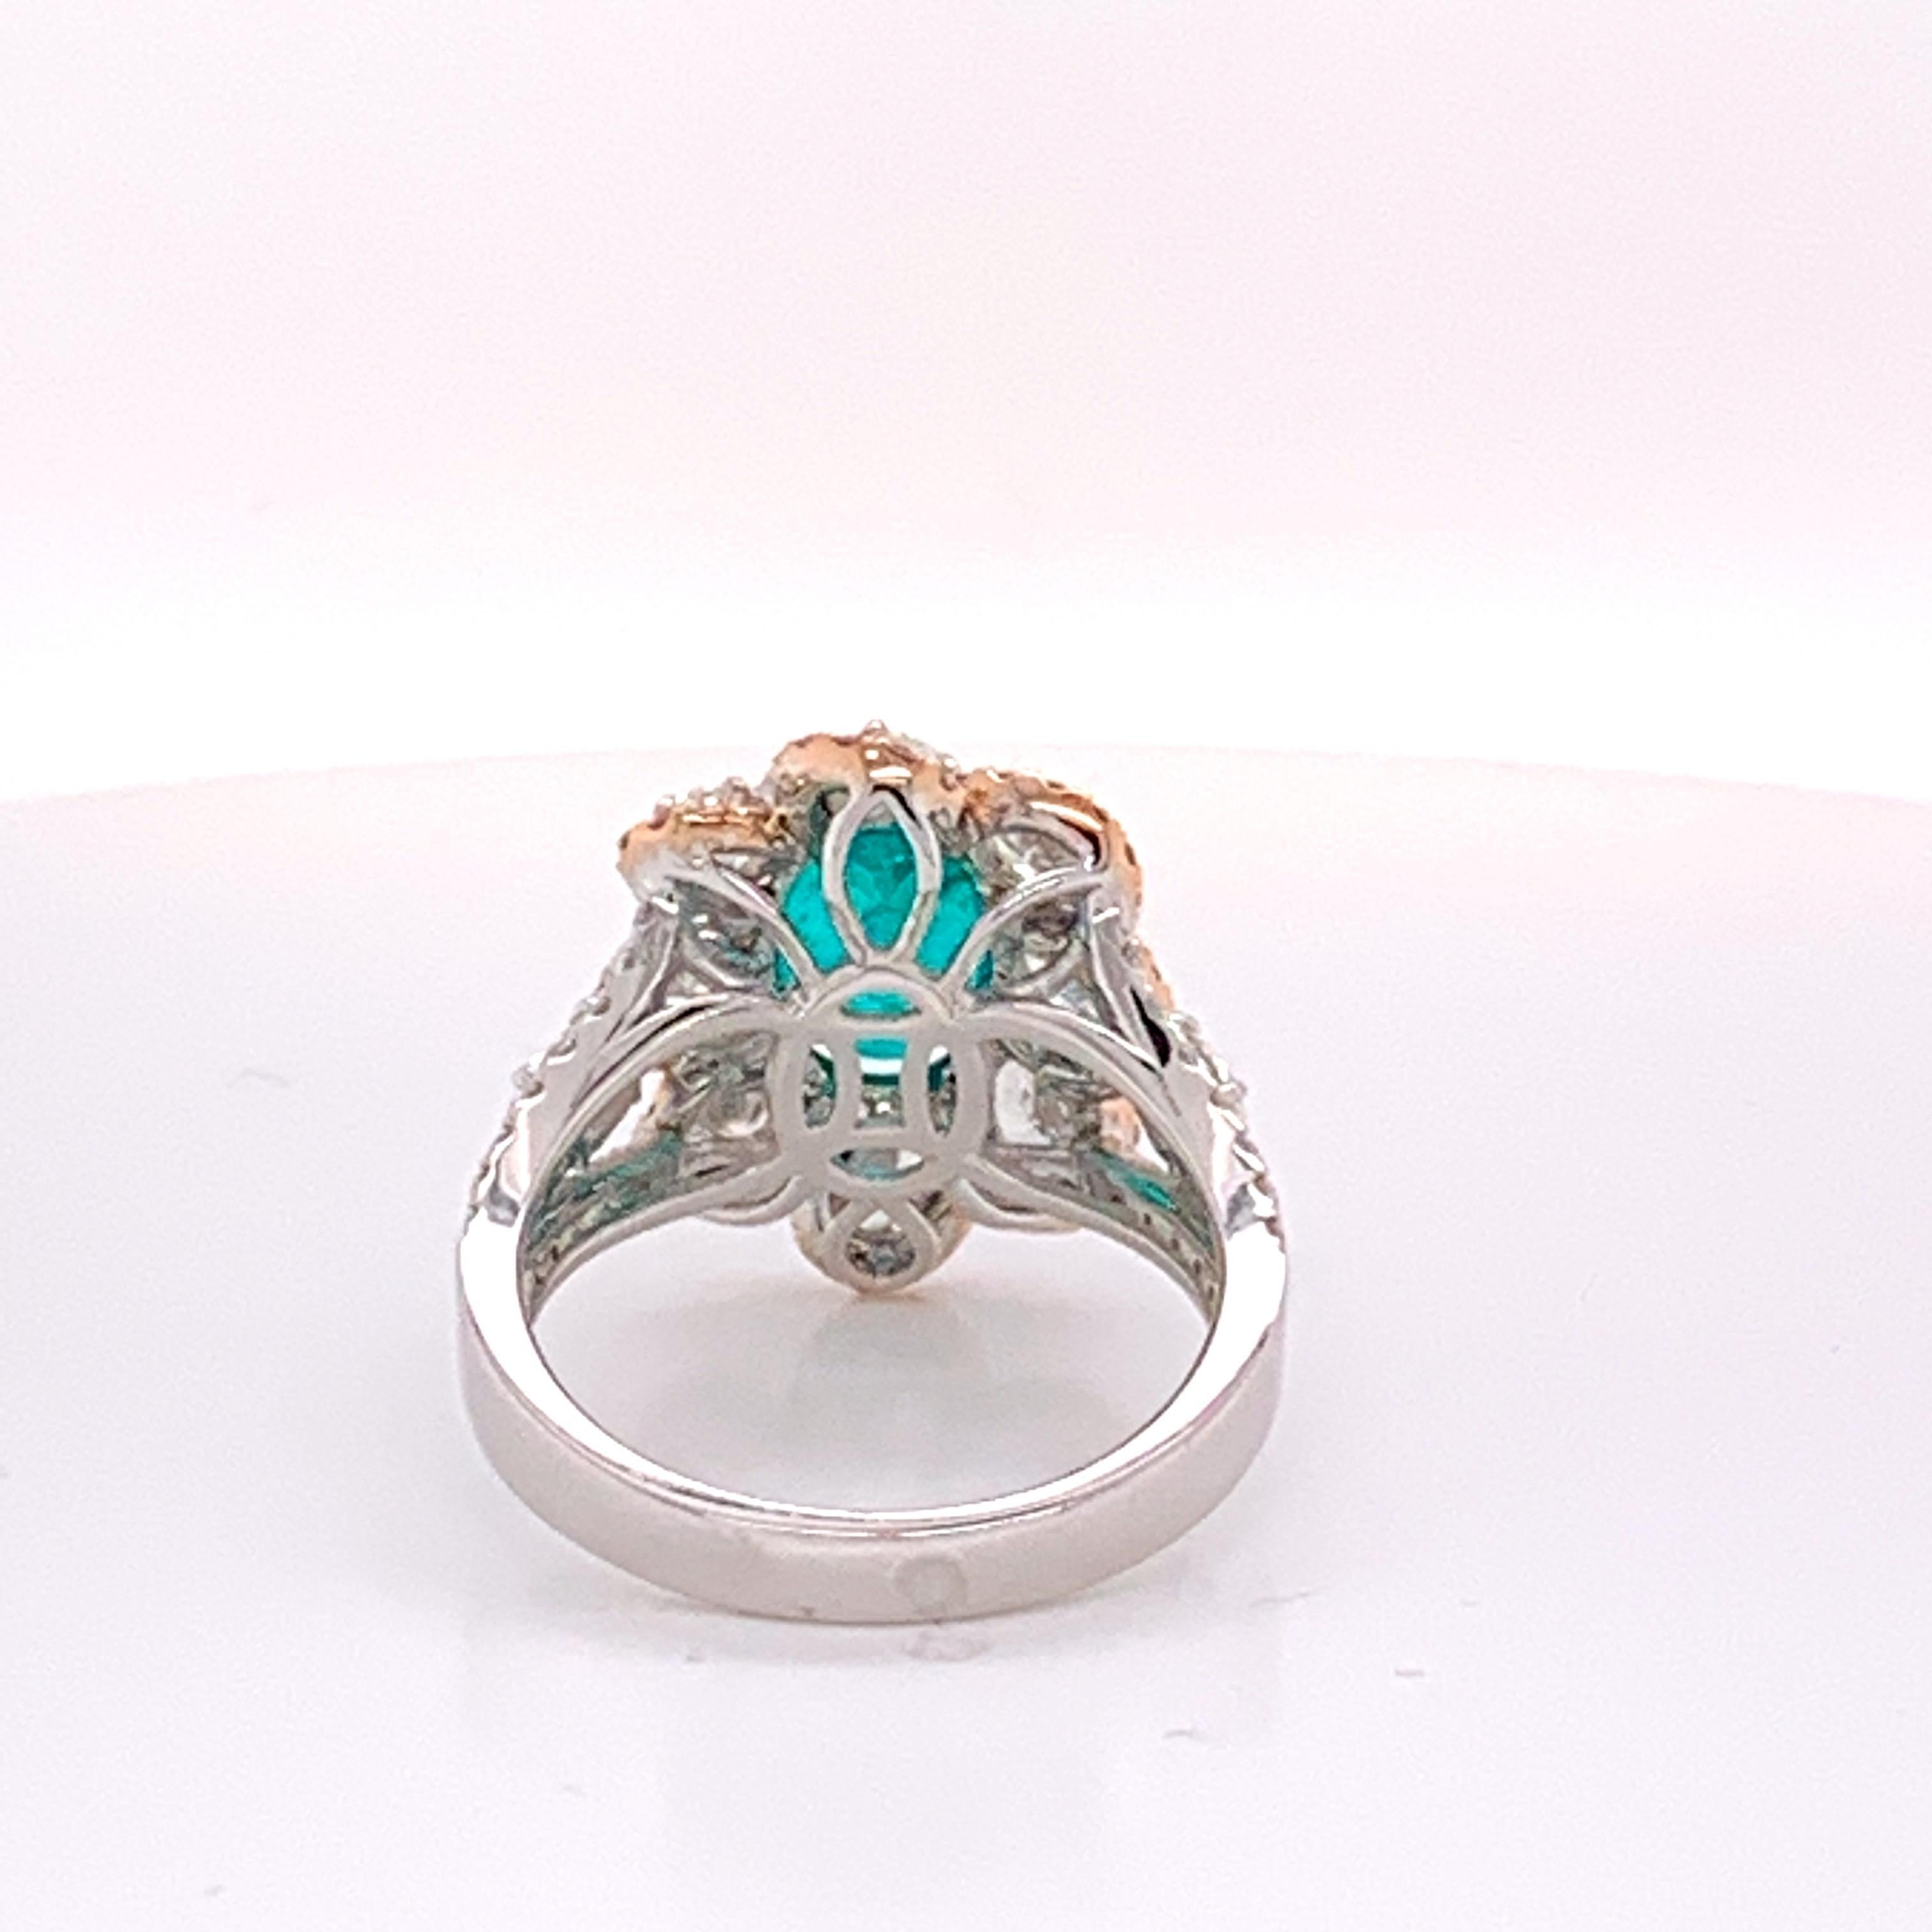 Oval Cut GIA Certified 2.67 Carat Paraiba Tourmaline and Diamonds Ring For Sale